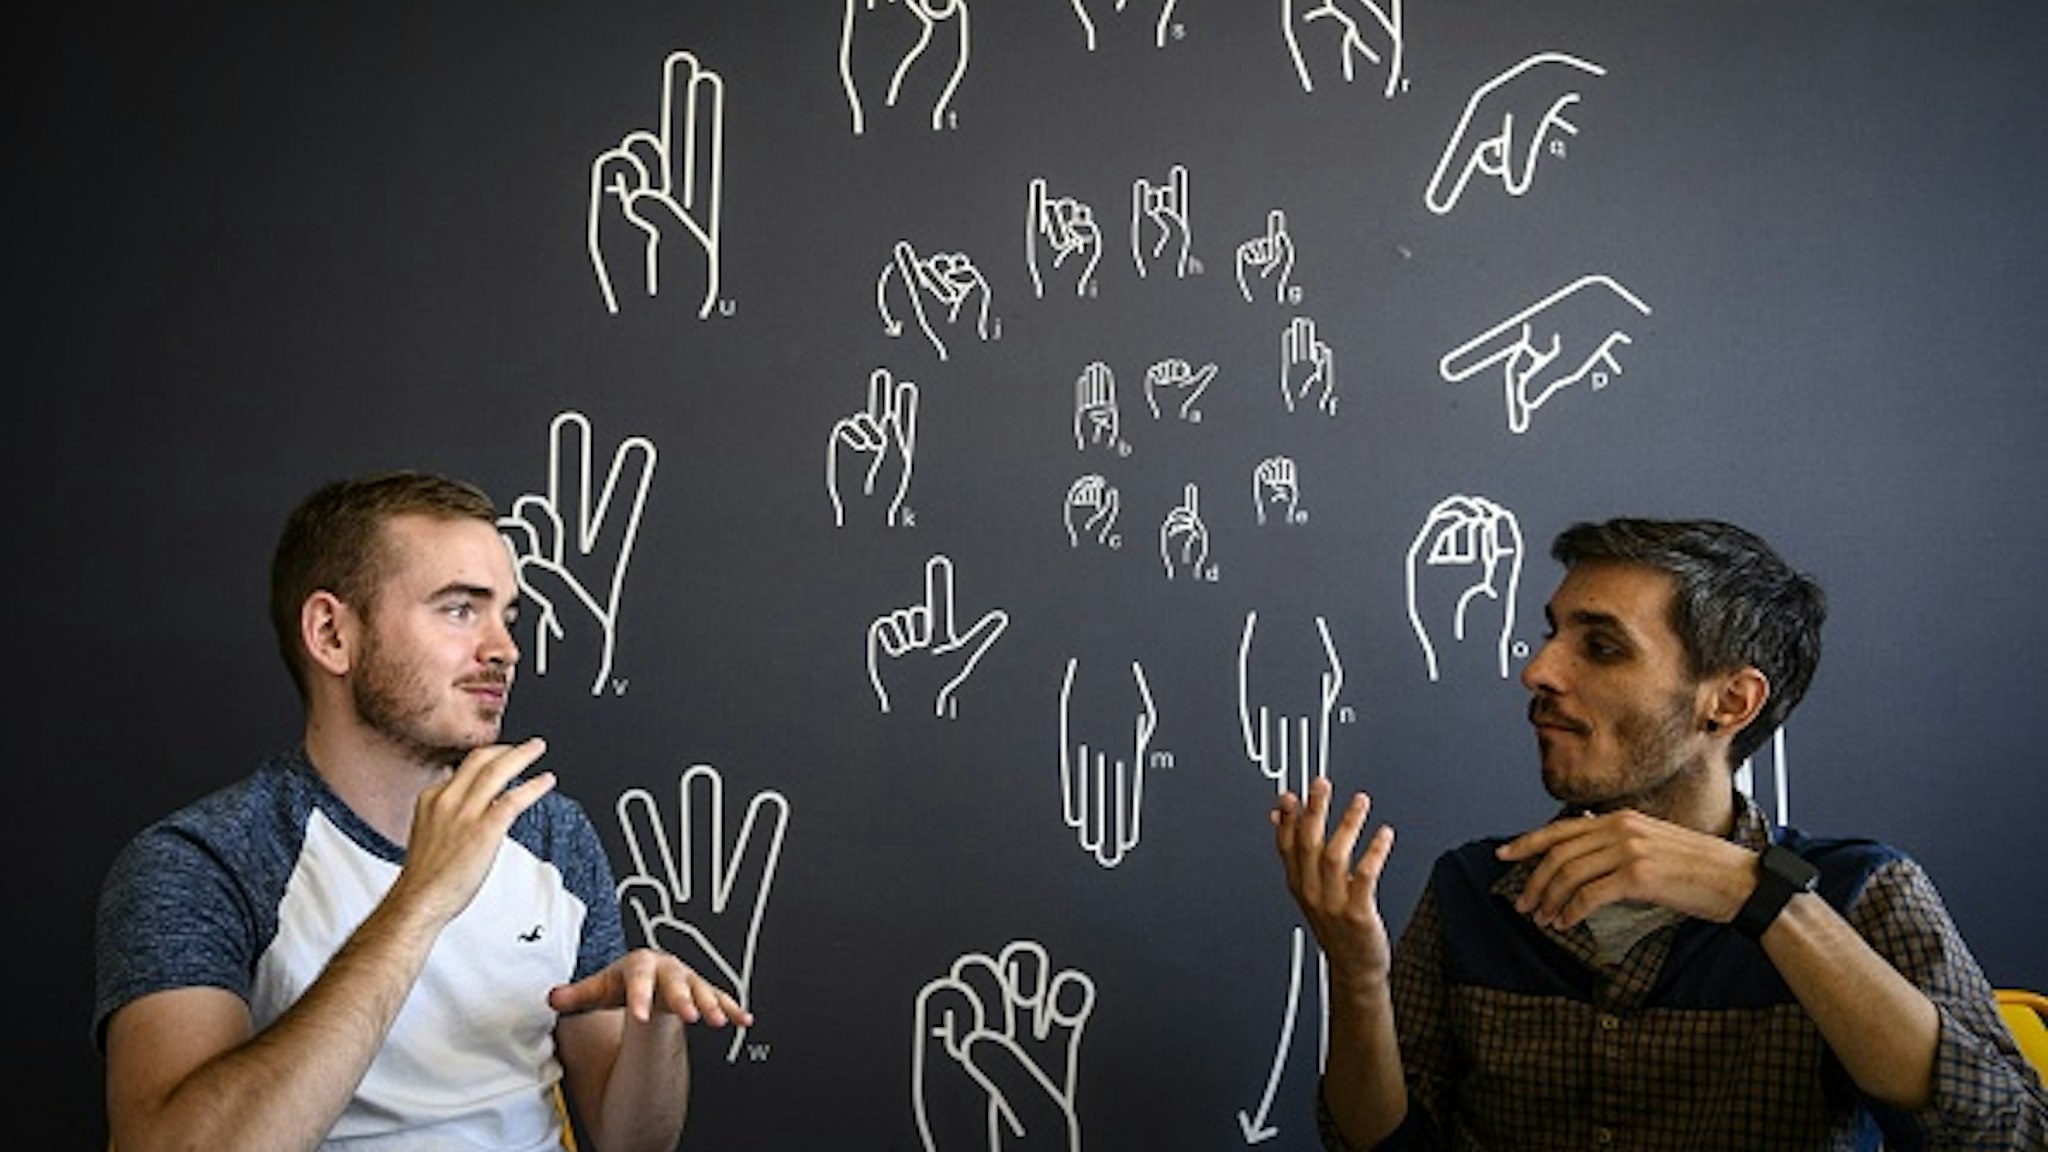 Hearing-impaired students take part in a sign language webdesign course at "Signes &amp; Formations" on the Lyon Digital Campus, on May 22, 2019.